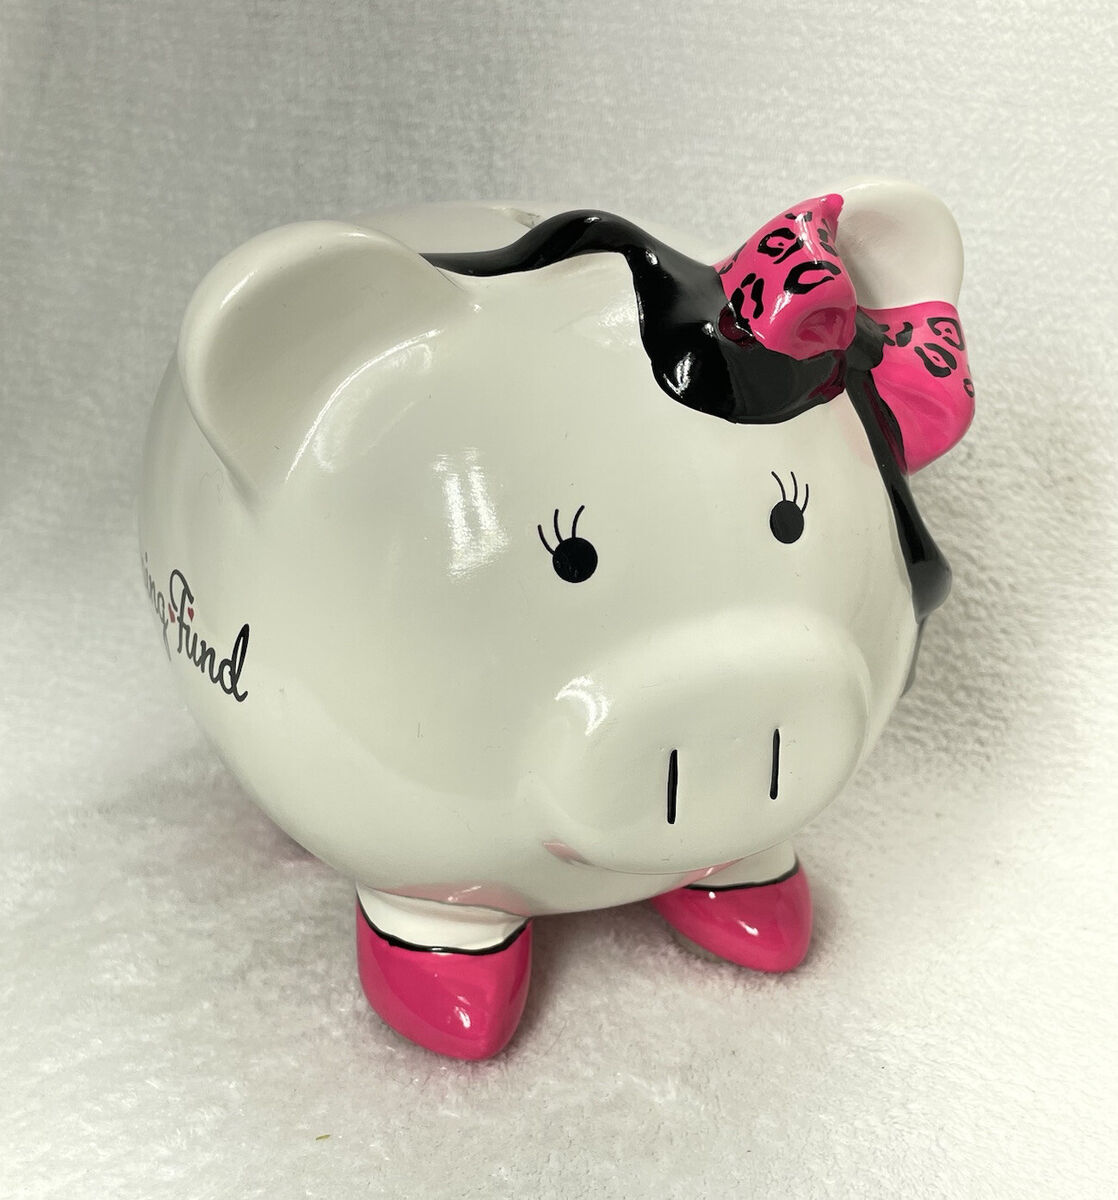 Leading Coin Bank Manufacturers, Suppliers & Companies